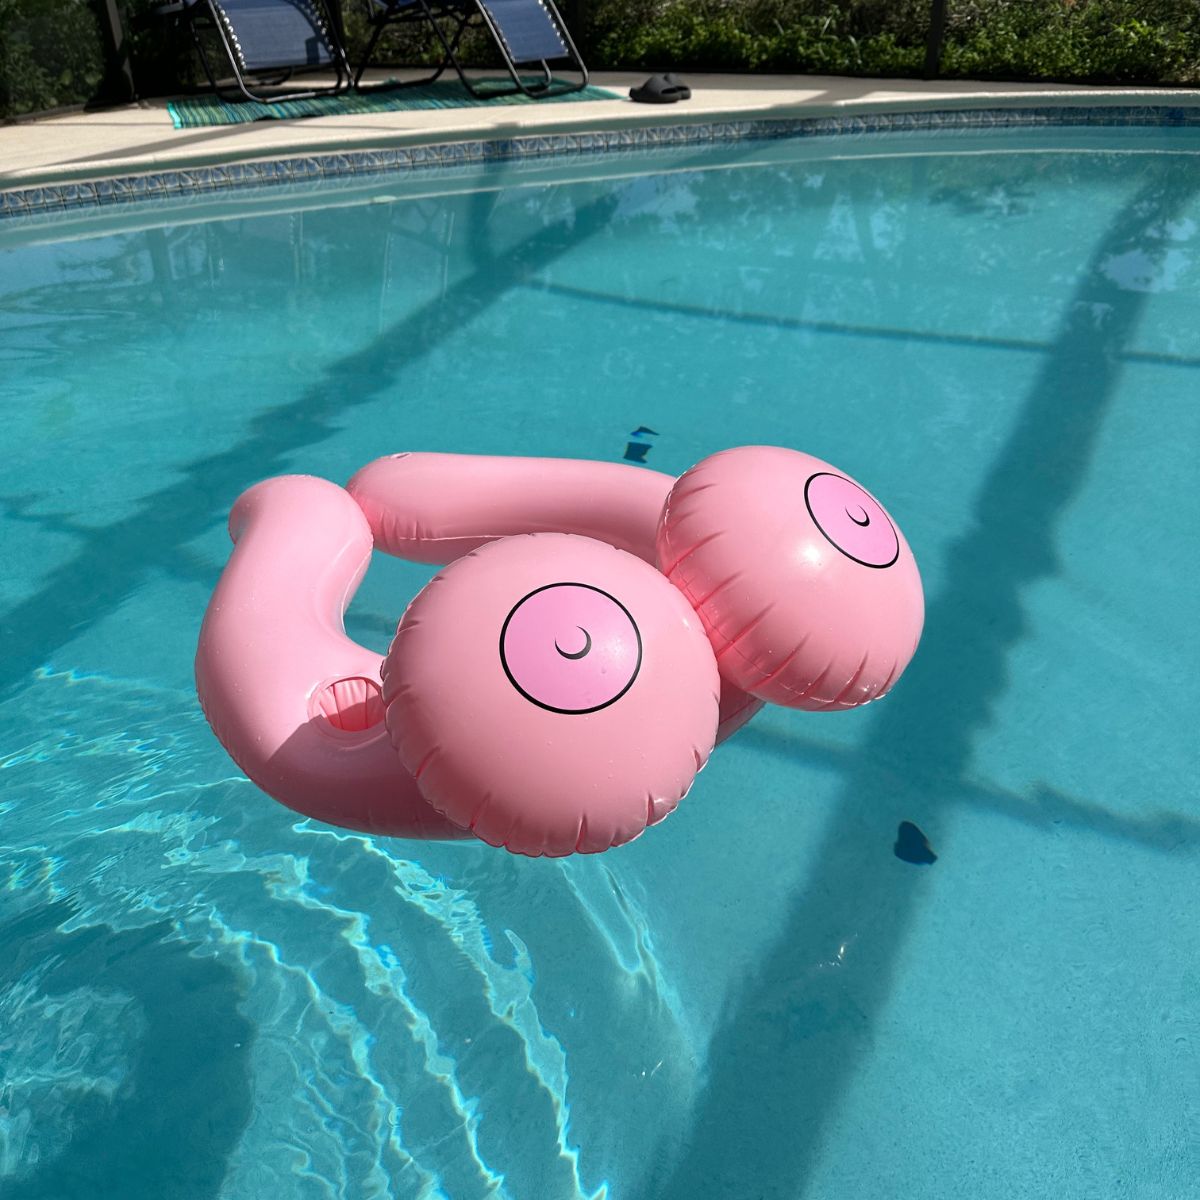 Boobie inflatable Floater Raft 3 ft.